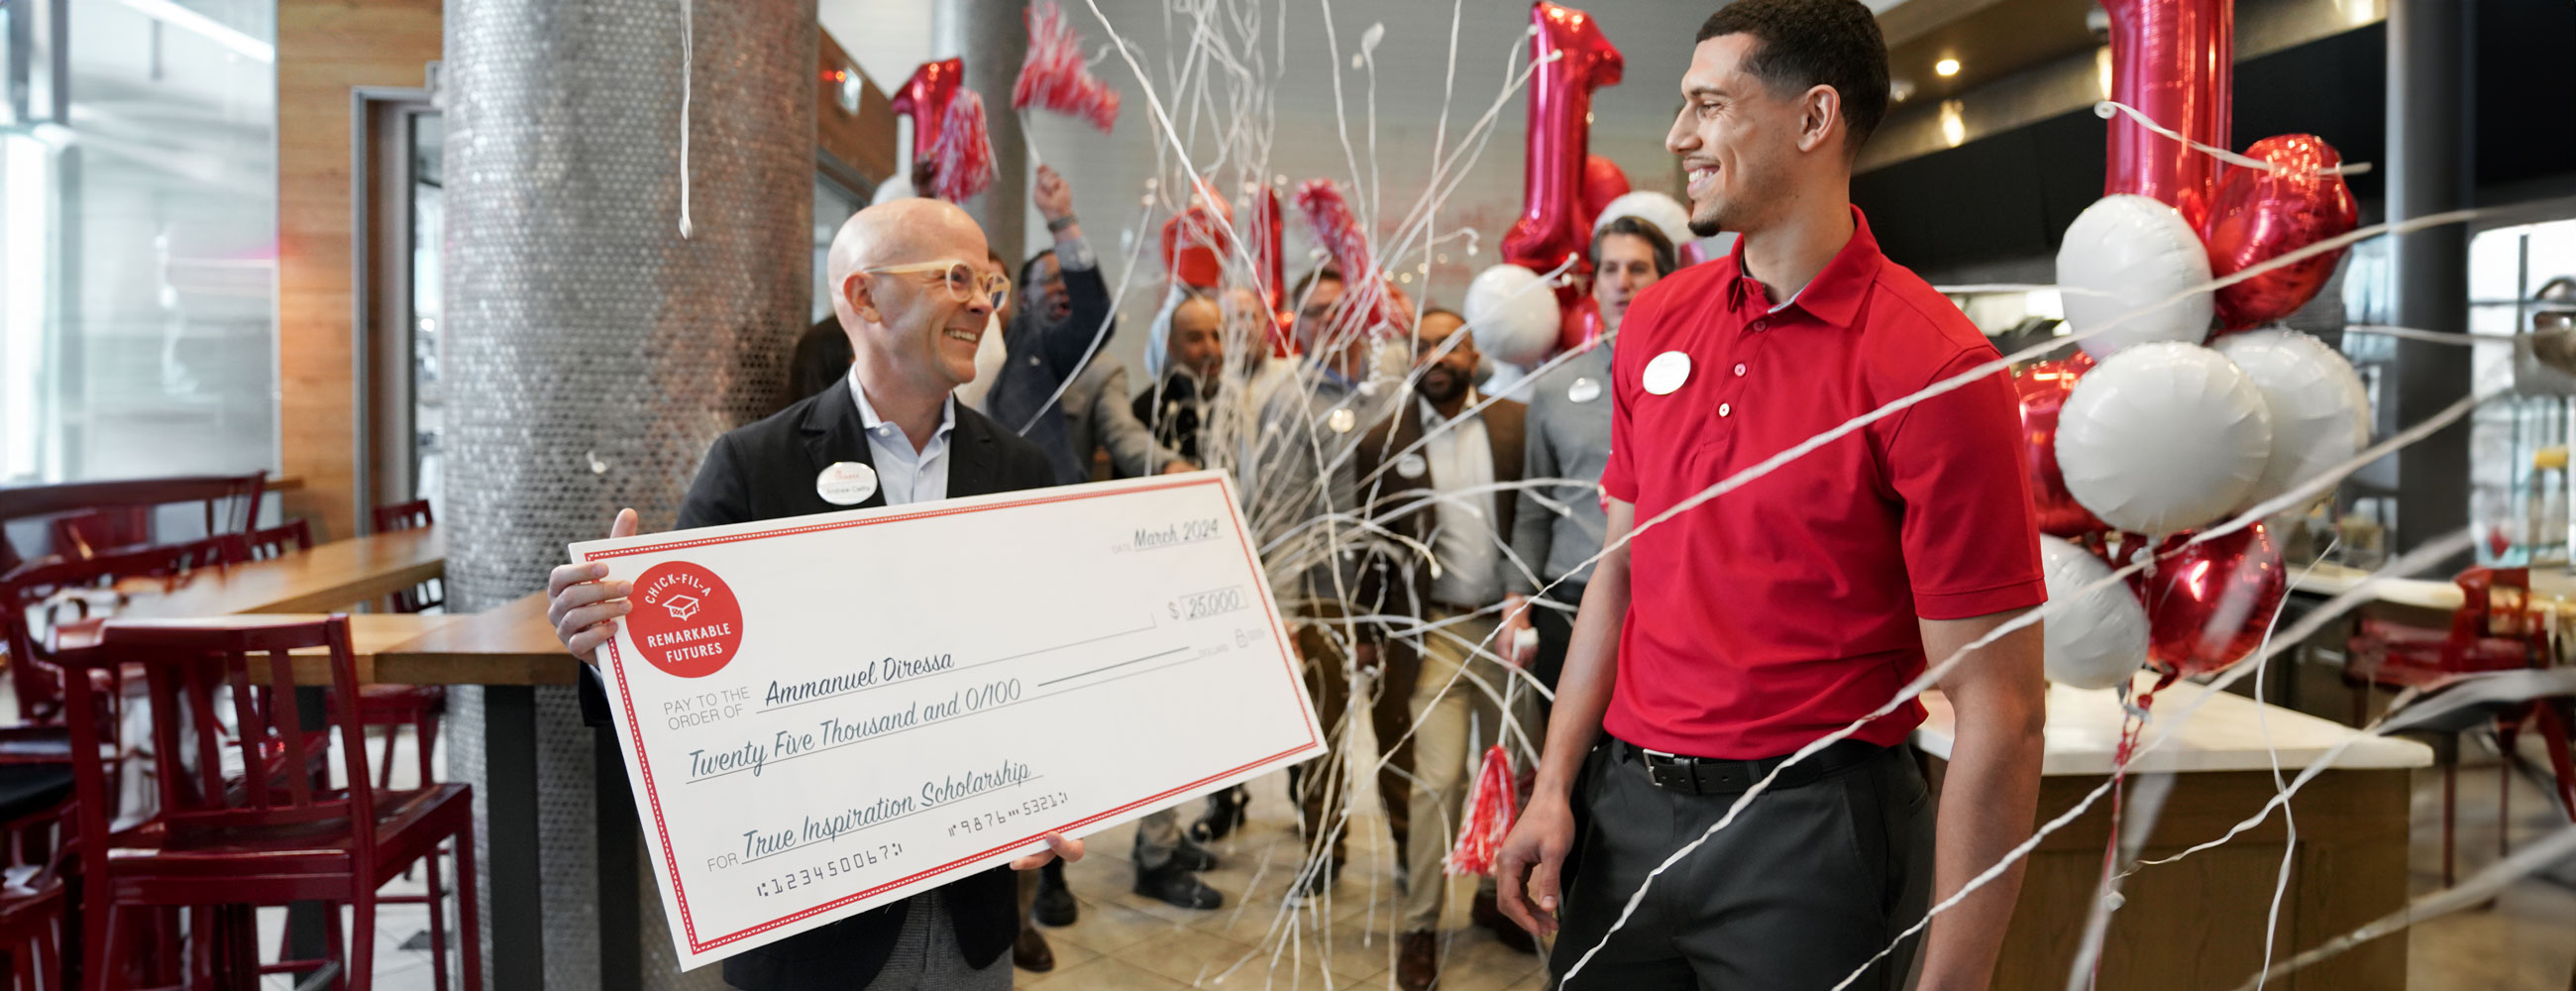 Chick-fil-A Awards $26 Million+ in Scholarships to Restaurant Team Members across North America